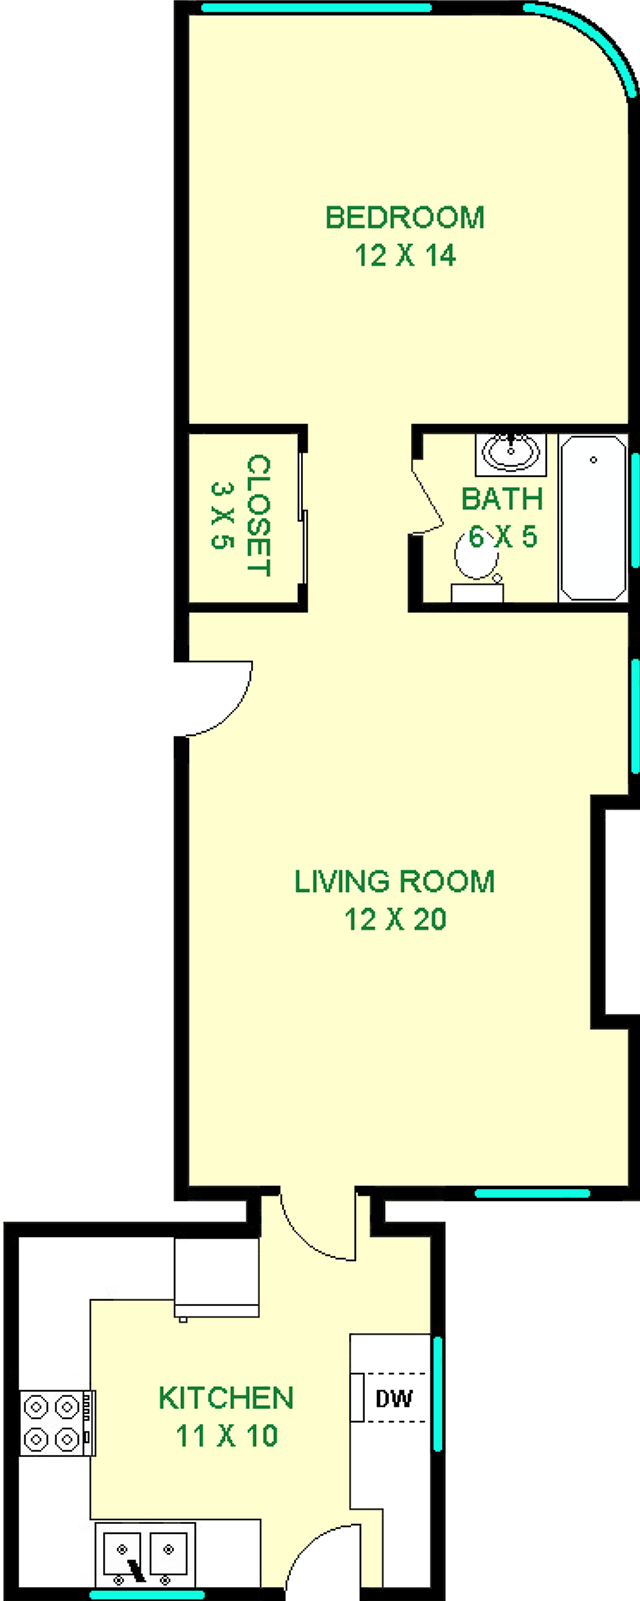 Trillium One Bedroom floorplan shows roughly 610 square feet, with a bedroom, bathroom, closet, living room, and a kitchen.